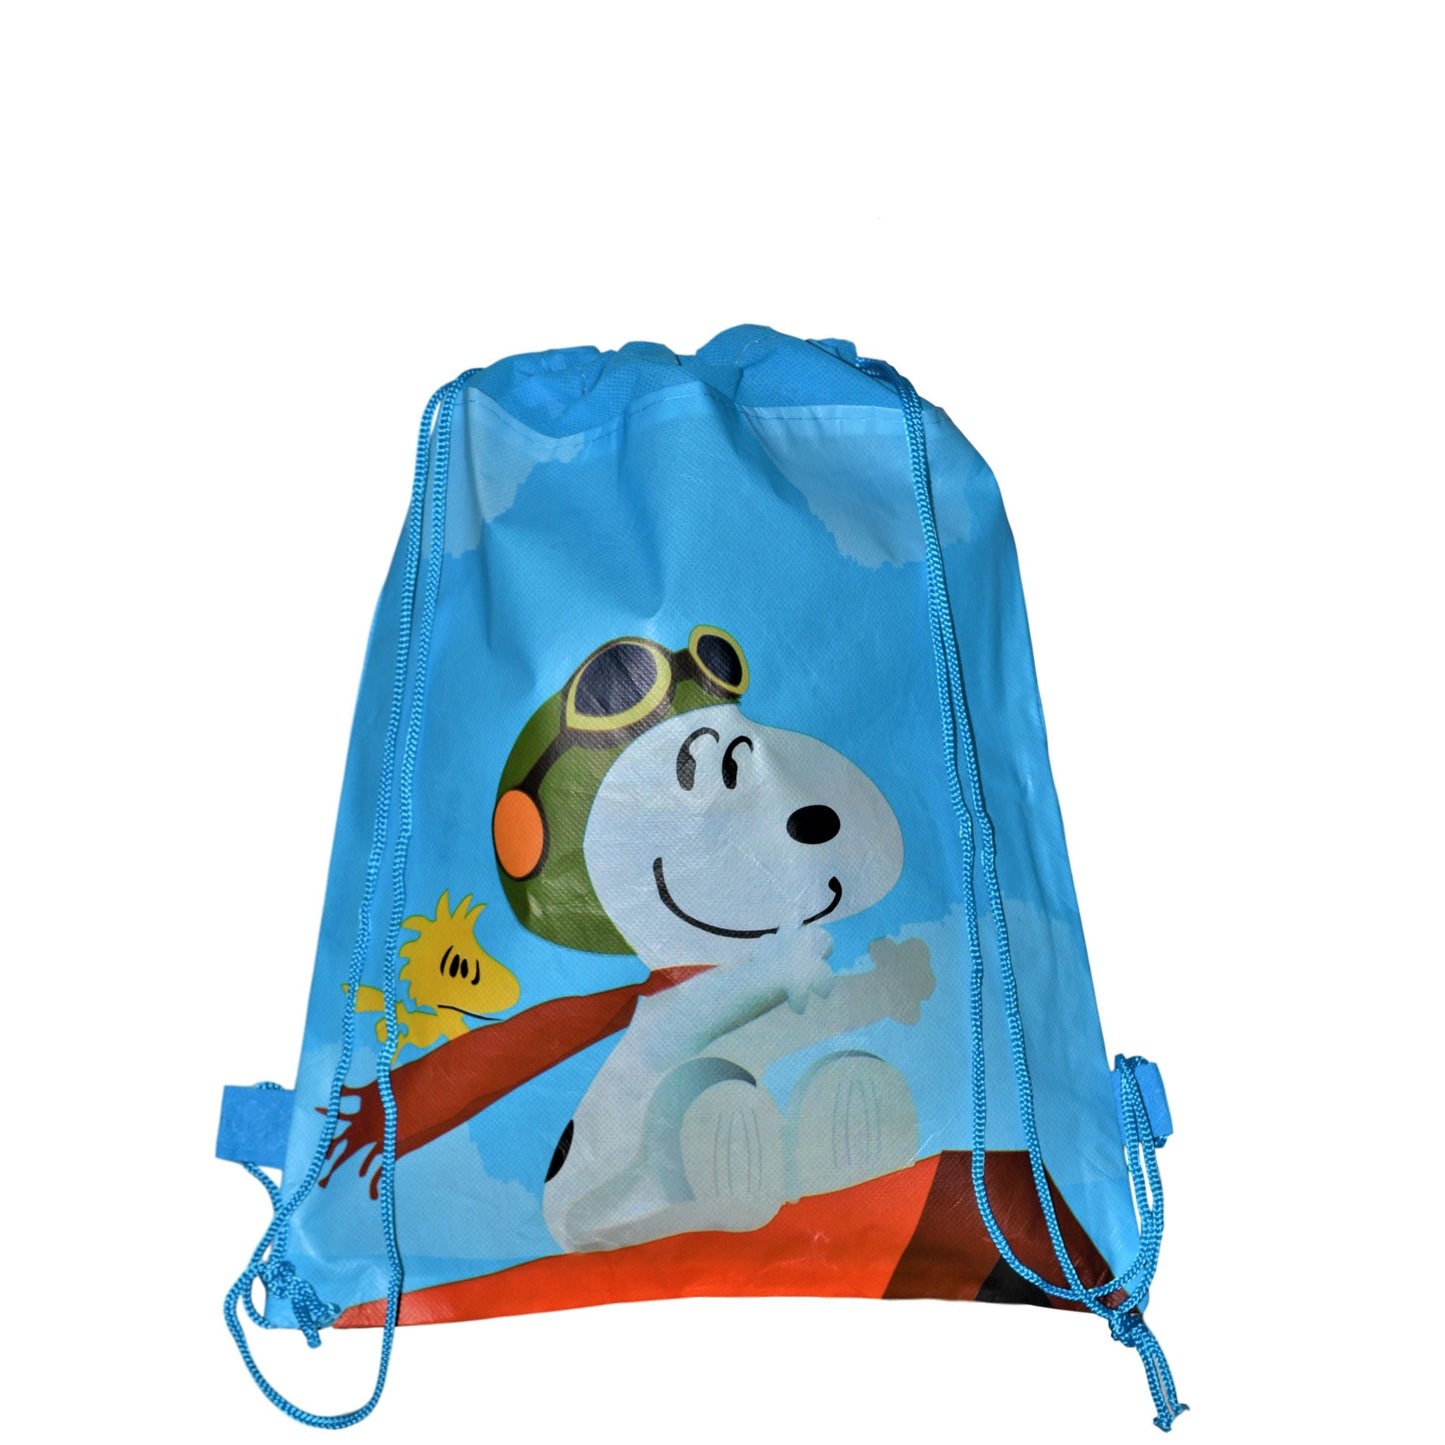 Peanuts Snoopy Cute Non- Woven Large Drawstring Bag For Kids 14" H x 10.5' L. limited Edition.